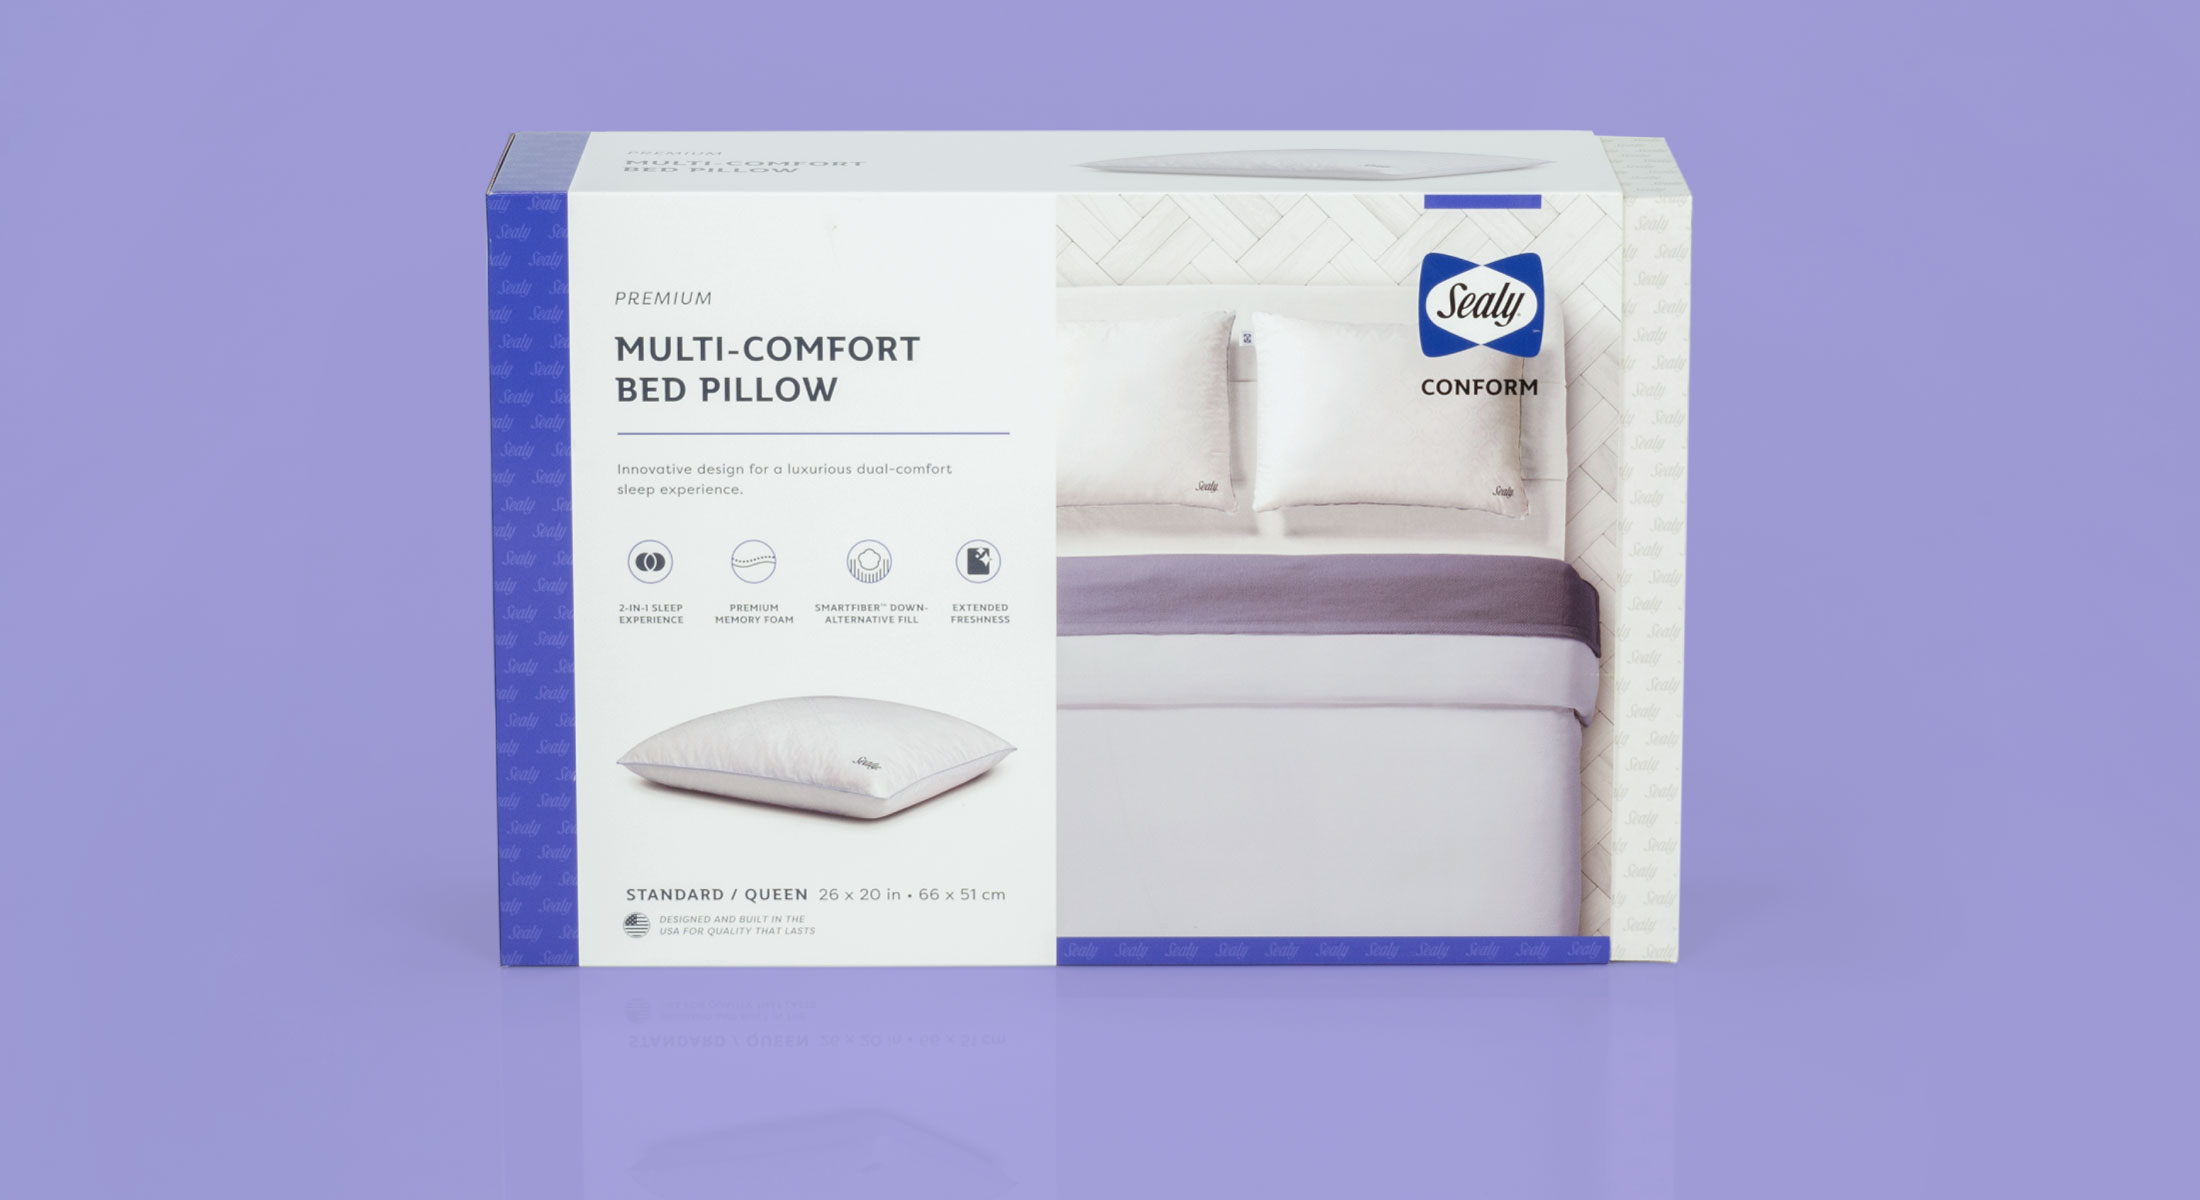 Sealy Conform Pillow Packaging